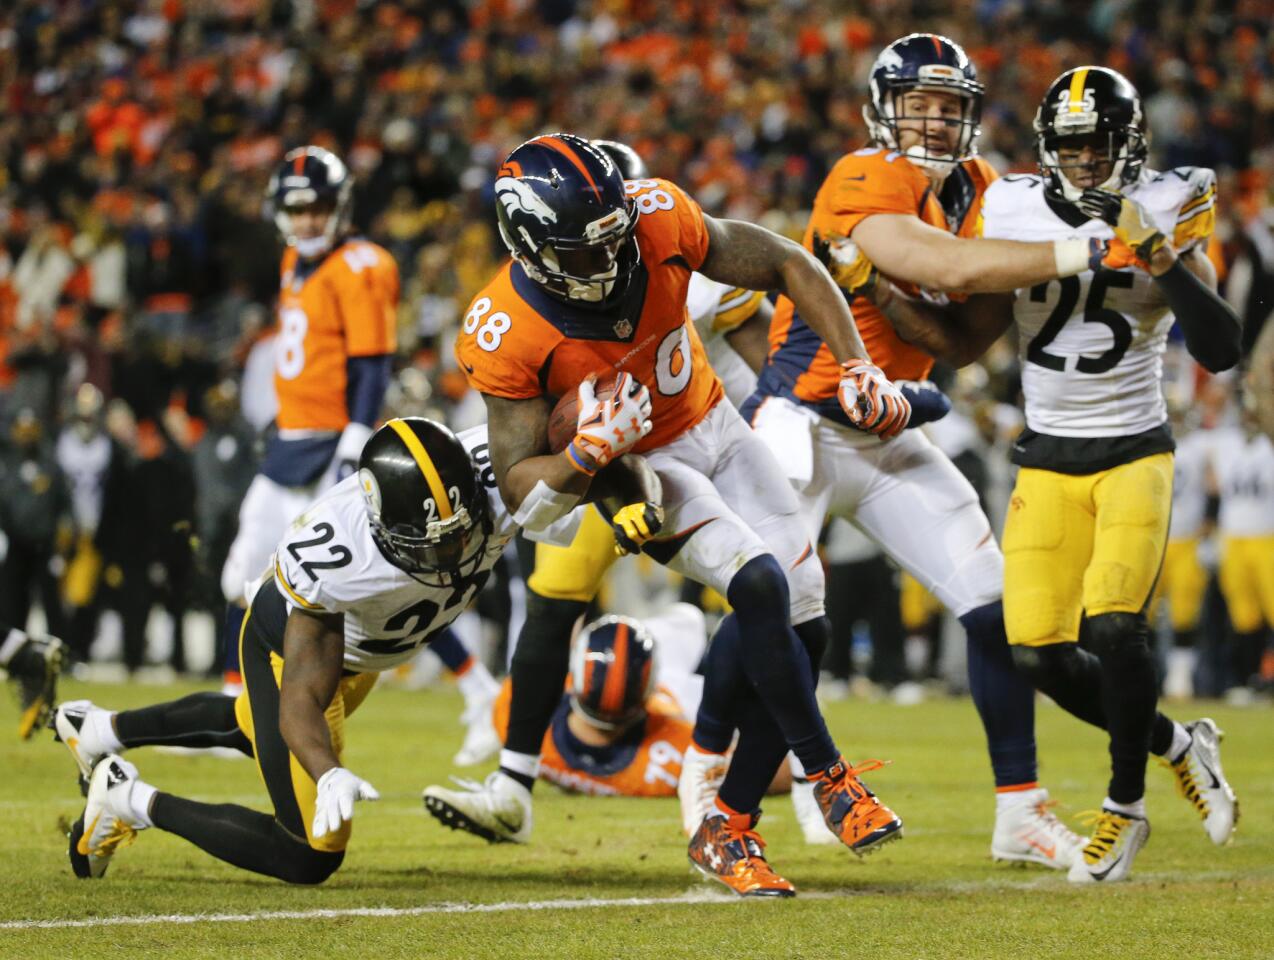 Denver Broncos wide receiver Demaryius Thomas scores the two-point conversion against the Pittsburgh Steelers during the second half in an NFL football divisional playoff game, Sunday, Jan. 17, 2016, in Denver. (AP Photo/Jack Dempsey)